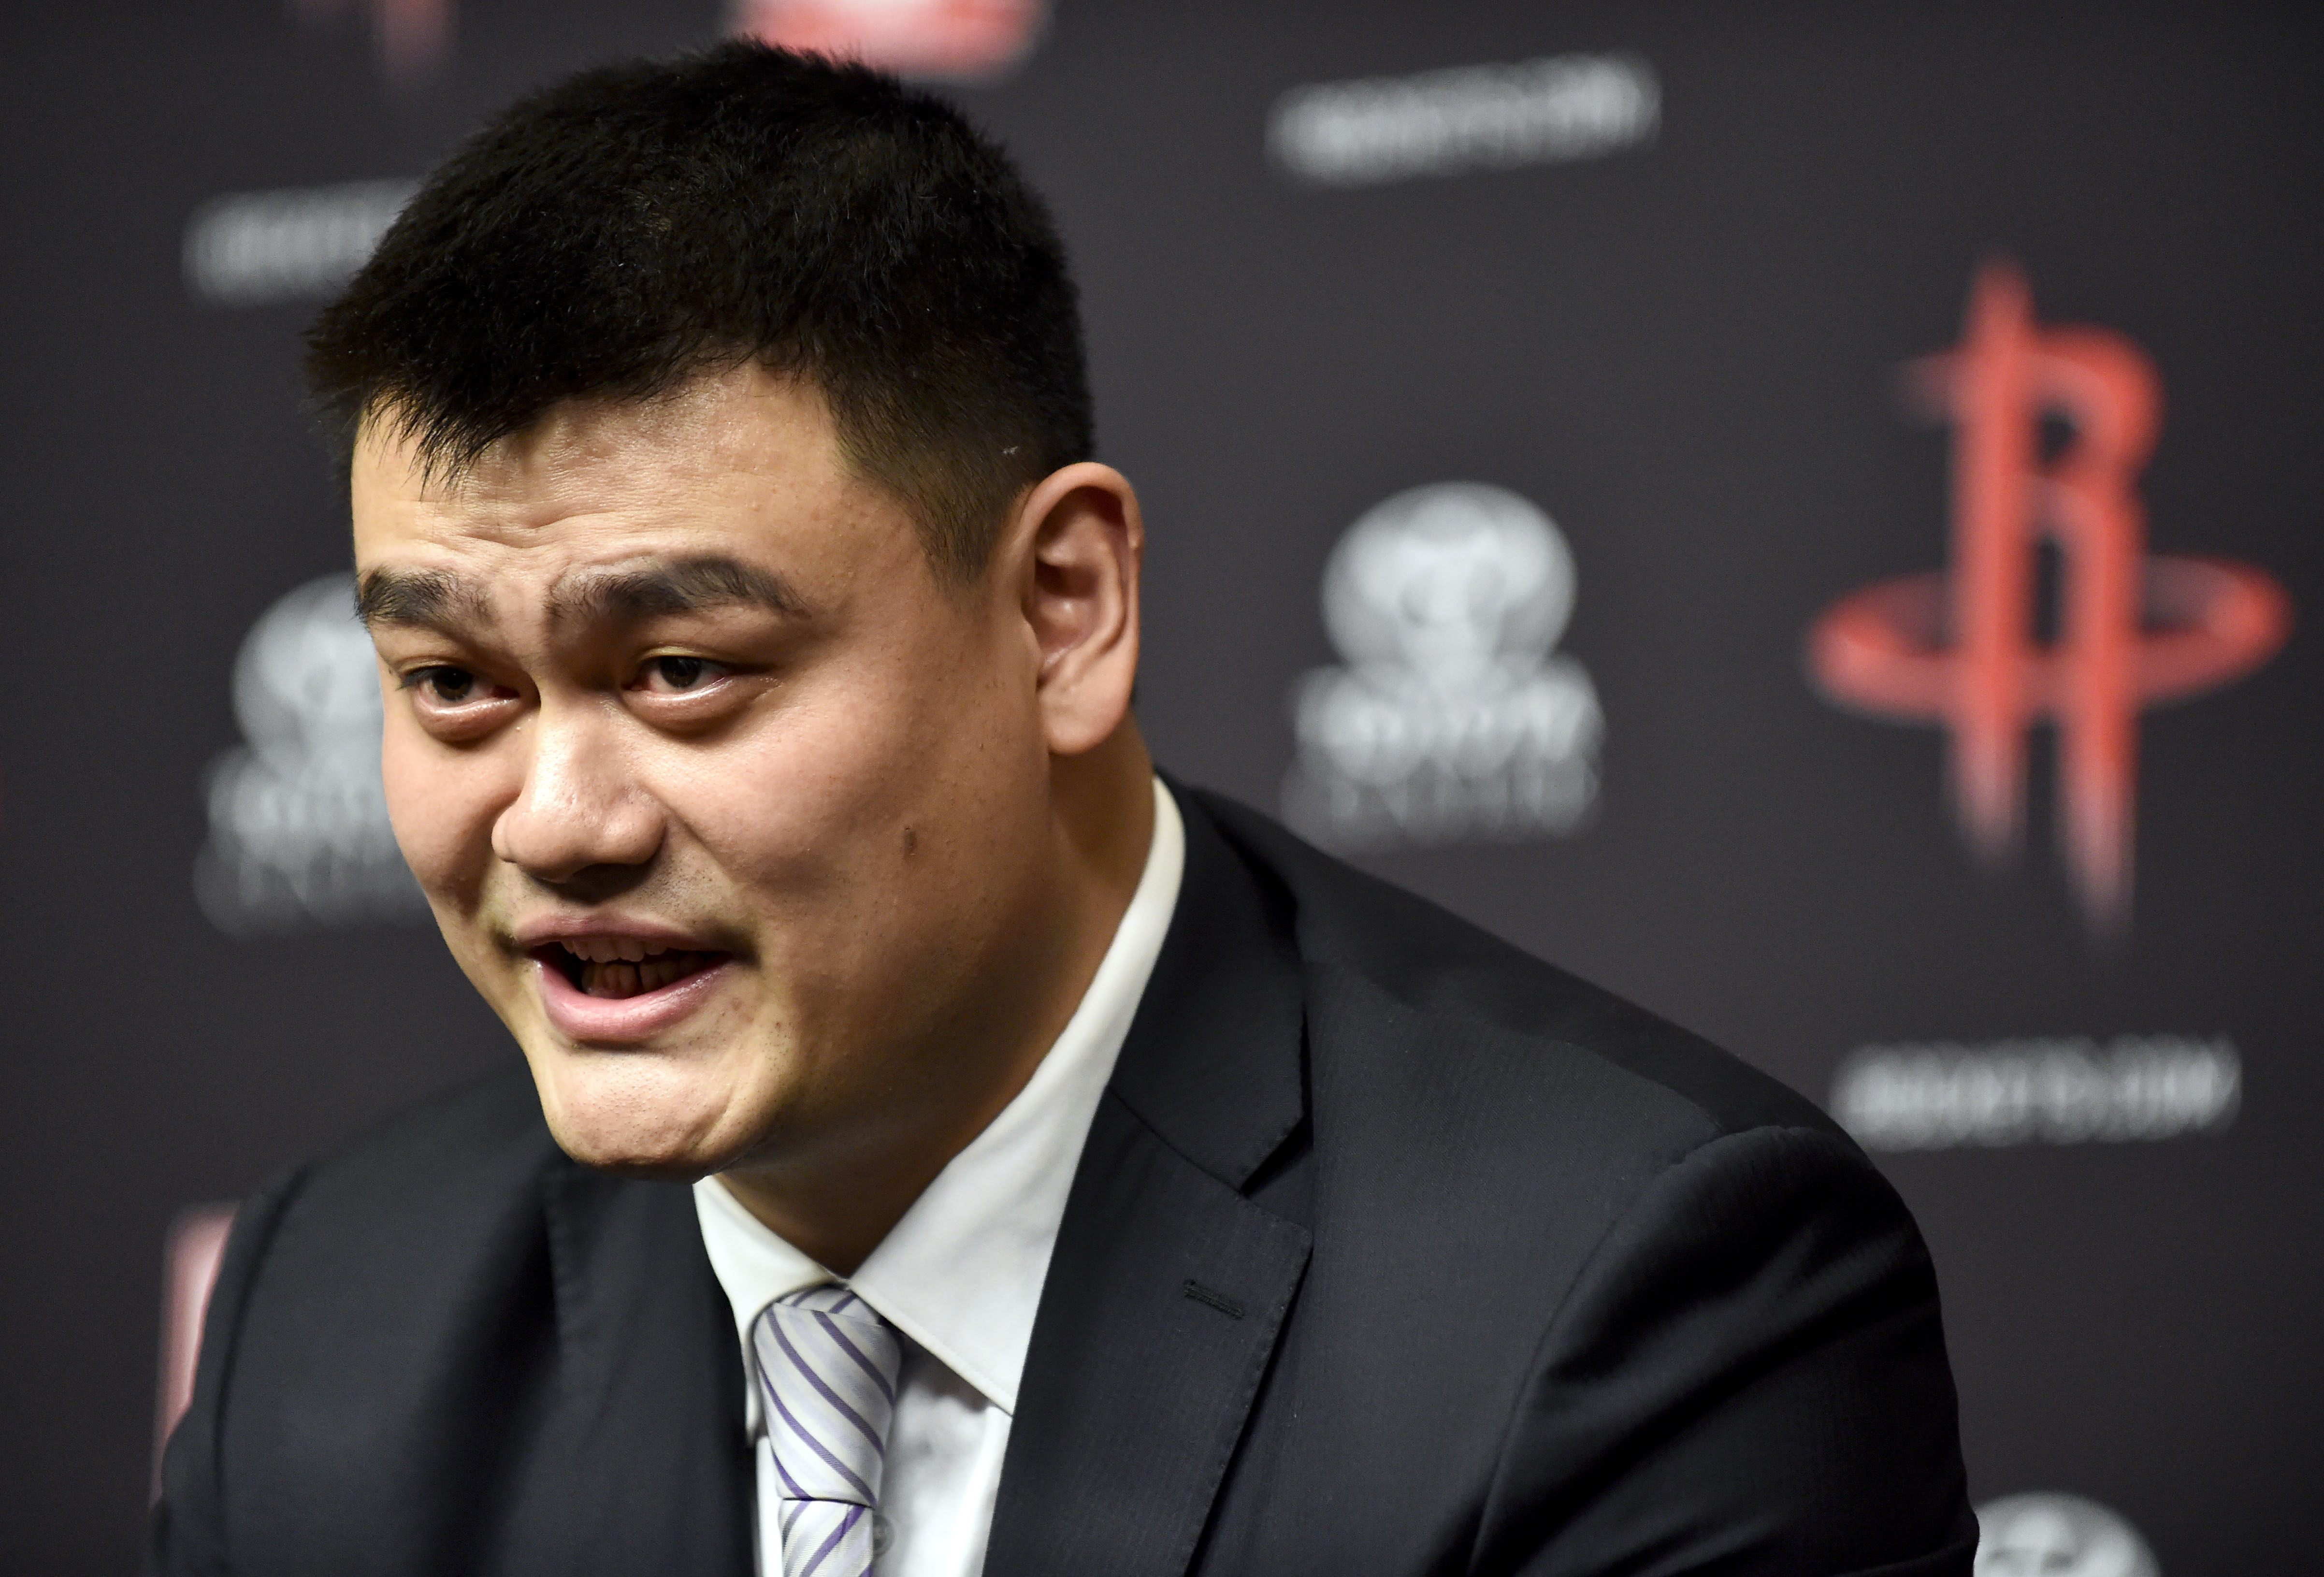 Retired Houston Rockets center Yao Ming speaks to the media before an NBA basketball game between the Houston Rockets and Chicago Bulls, Friday, Feb. 3, 2017, in Houston. (AP Photo/Eric Christian Smith)